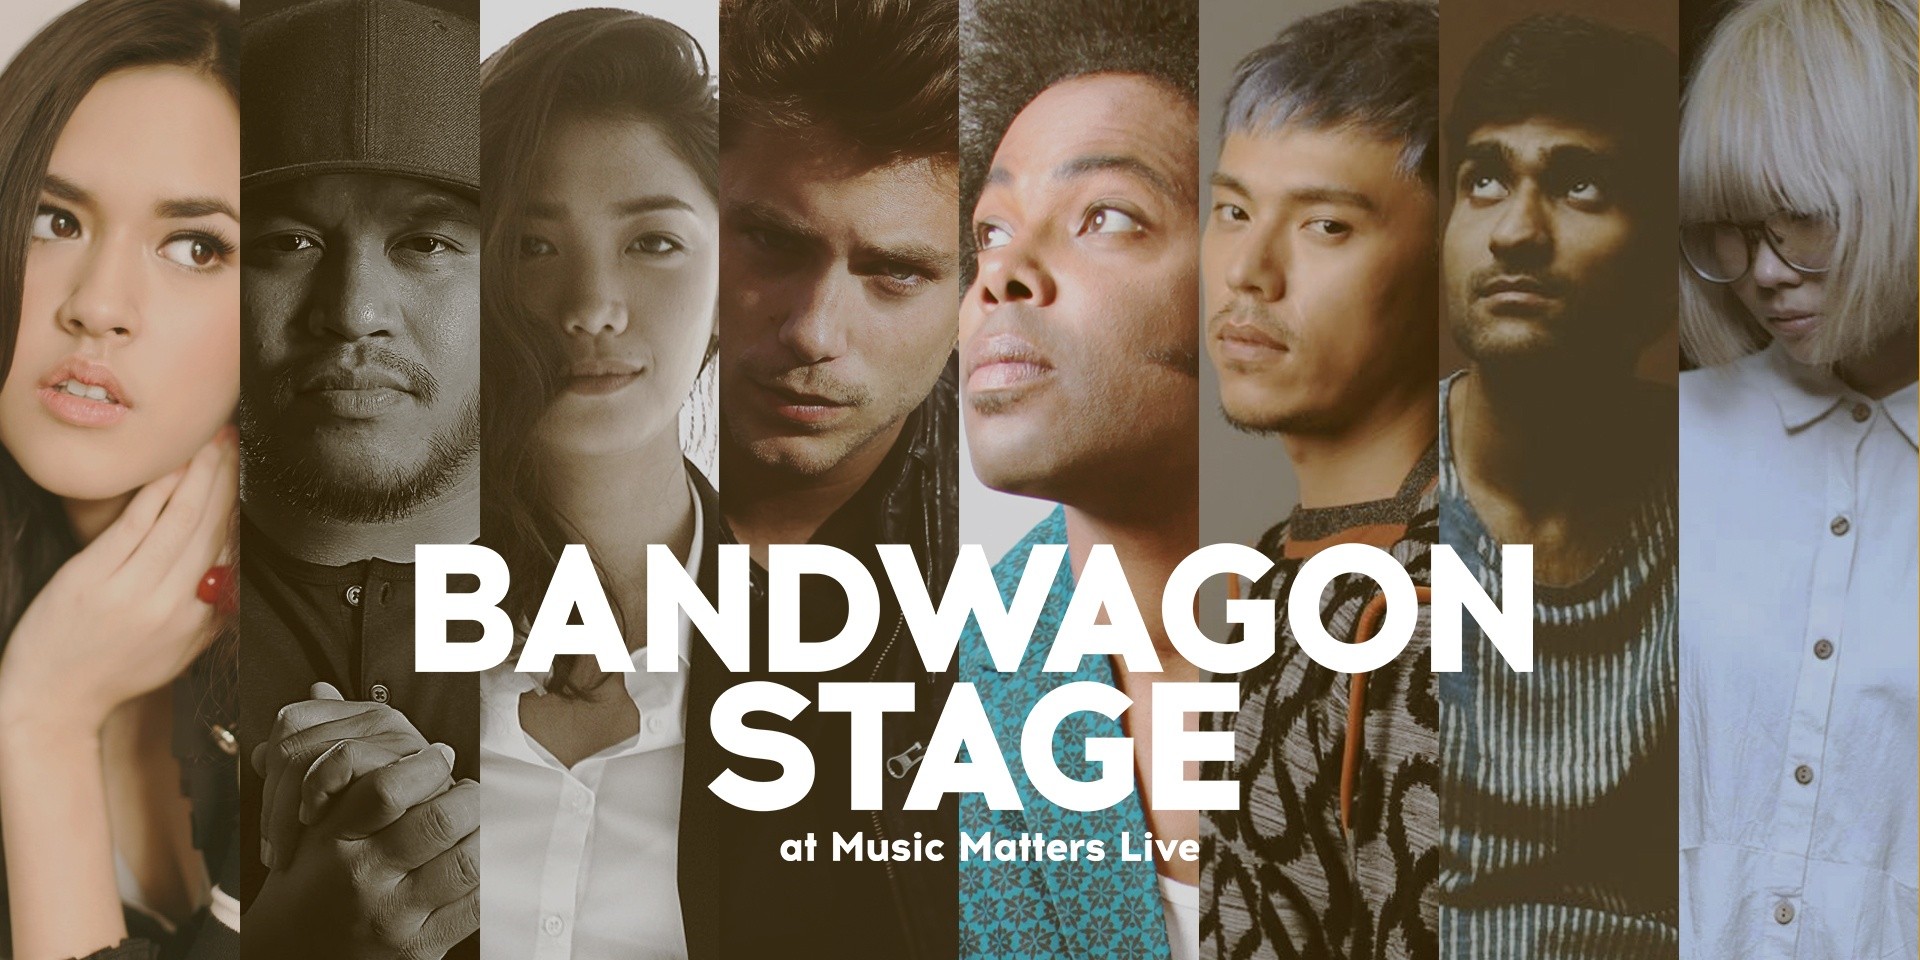 Here are the 8 acts performing on the Bandwagon Stage at Music Matters Festival